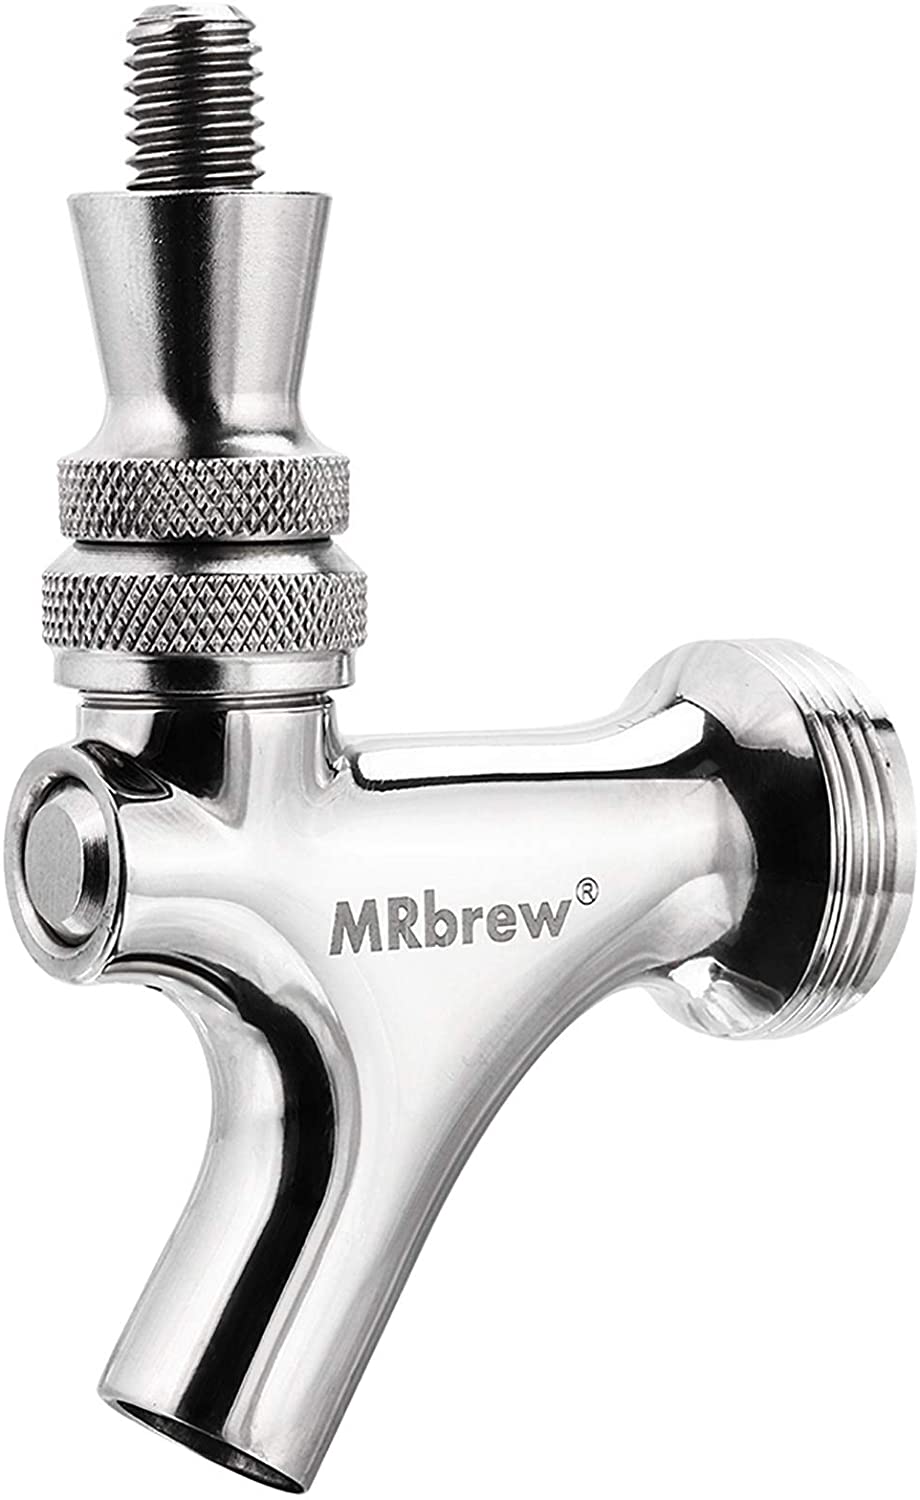 Upgraded Beer Faucet 304 Stainless Steel Beer Keg Tap, Beer Tap with Well-Pouring, For American Beer Shanks and Towers